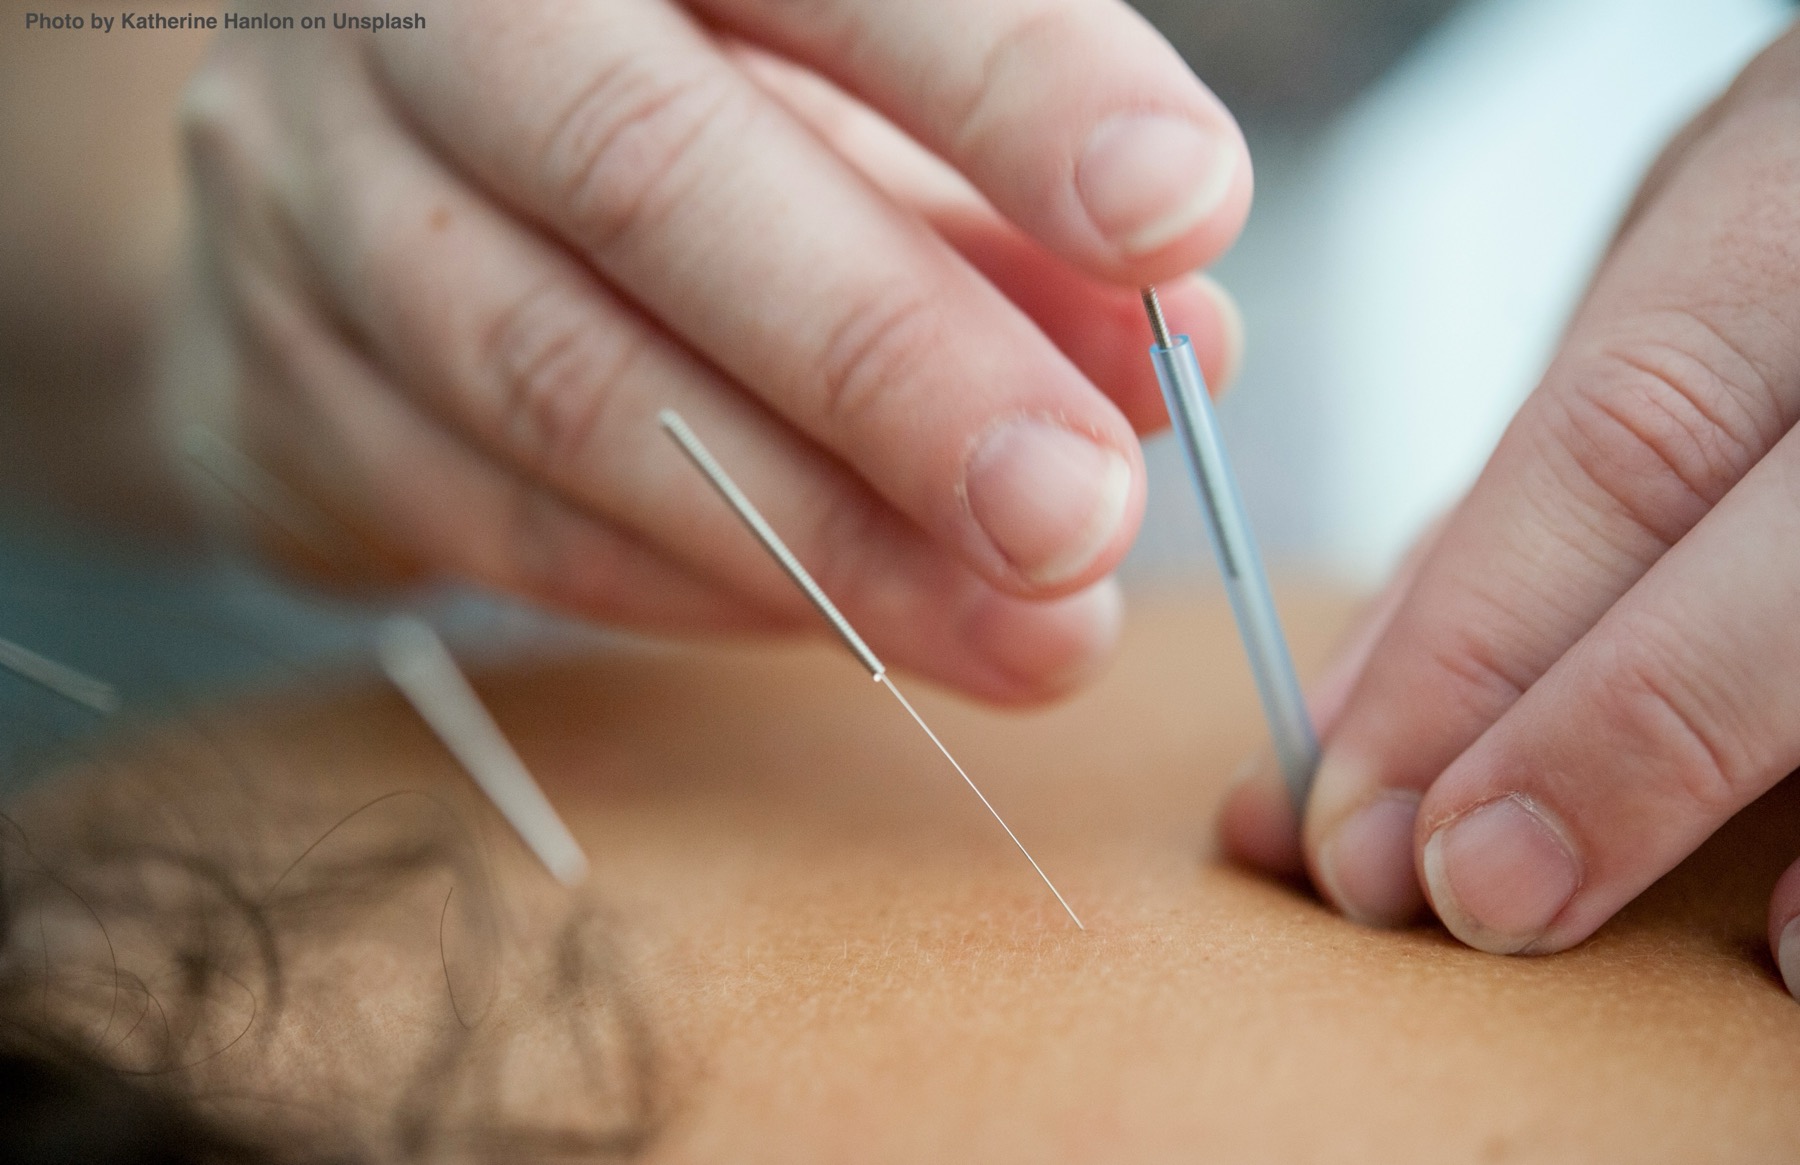 Acupuncture needling with a guide tube